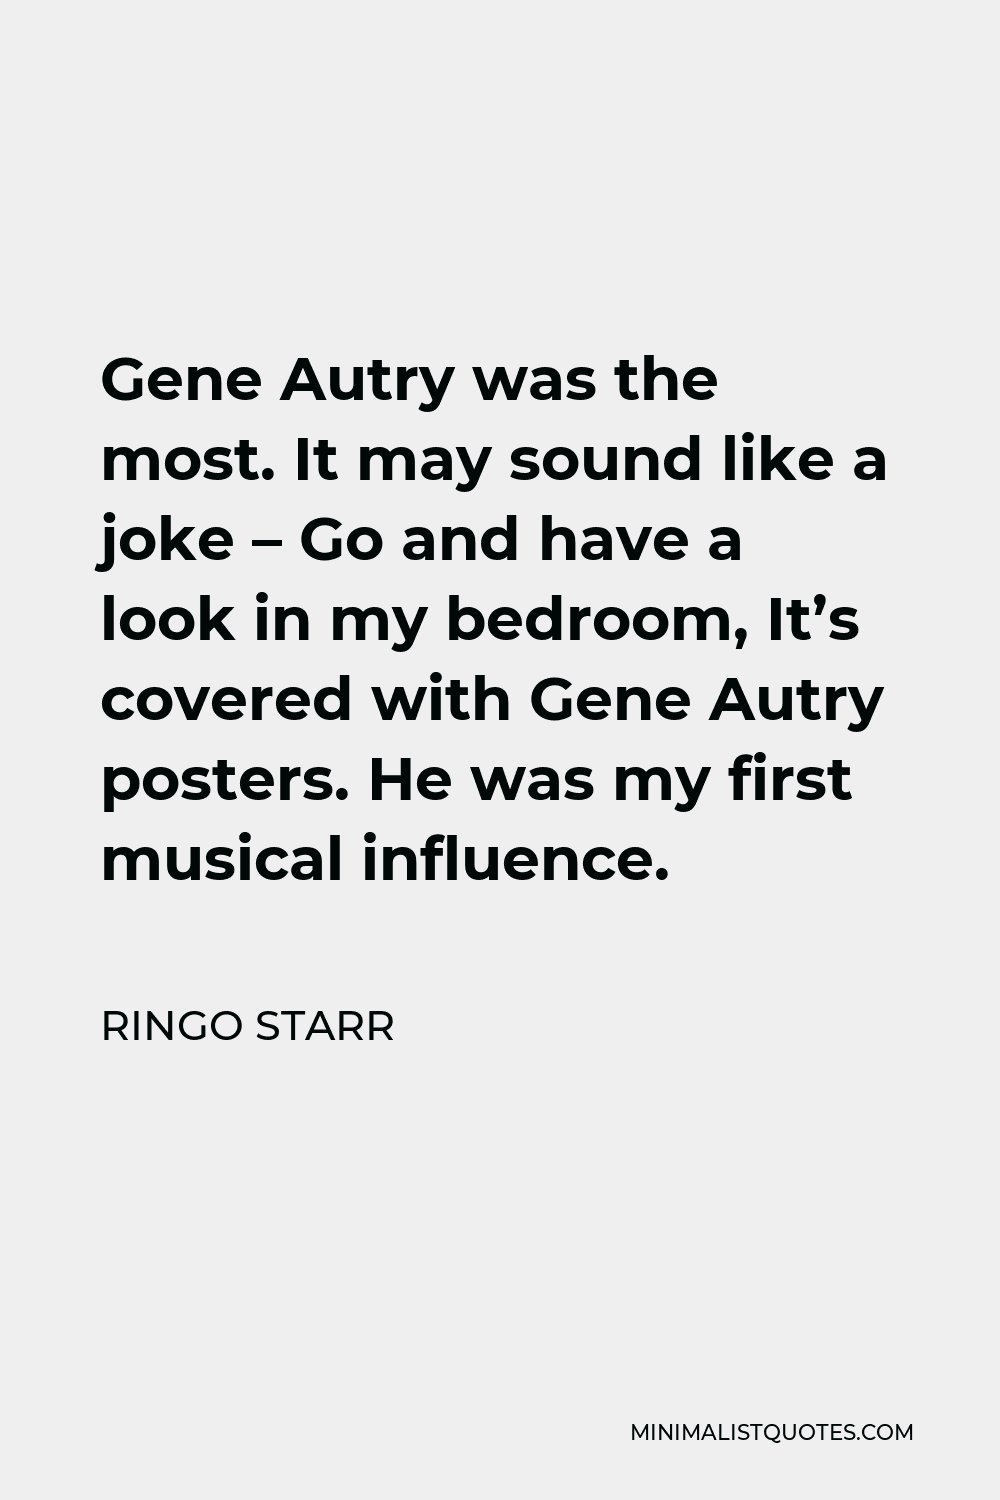 Ringo Starr Quote - Gene Autry was the most. It may sound like a joke – Go and have a look in my bedroom, It’s covered with Gene Autry posters. He was my first musical influence.